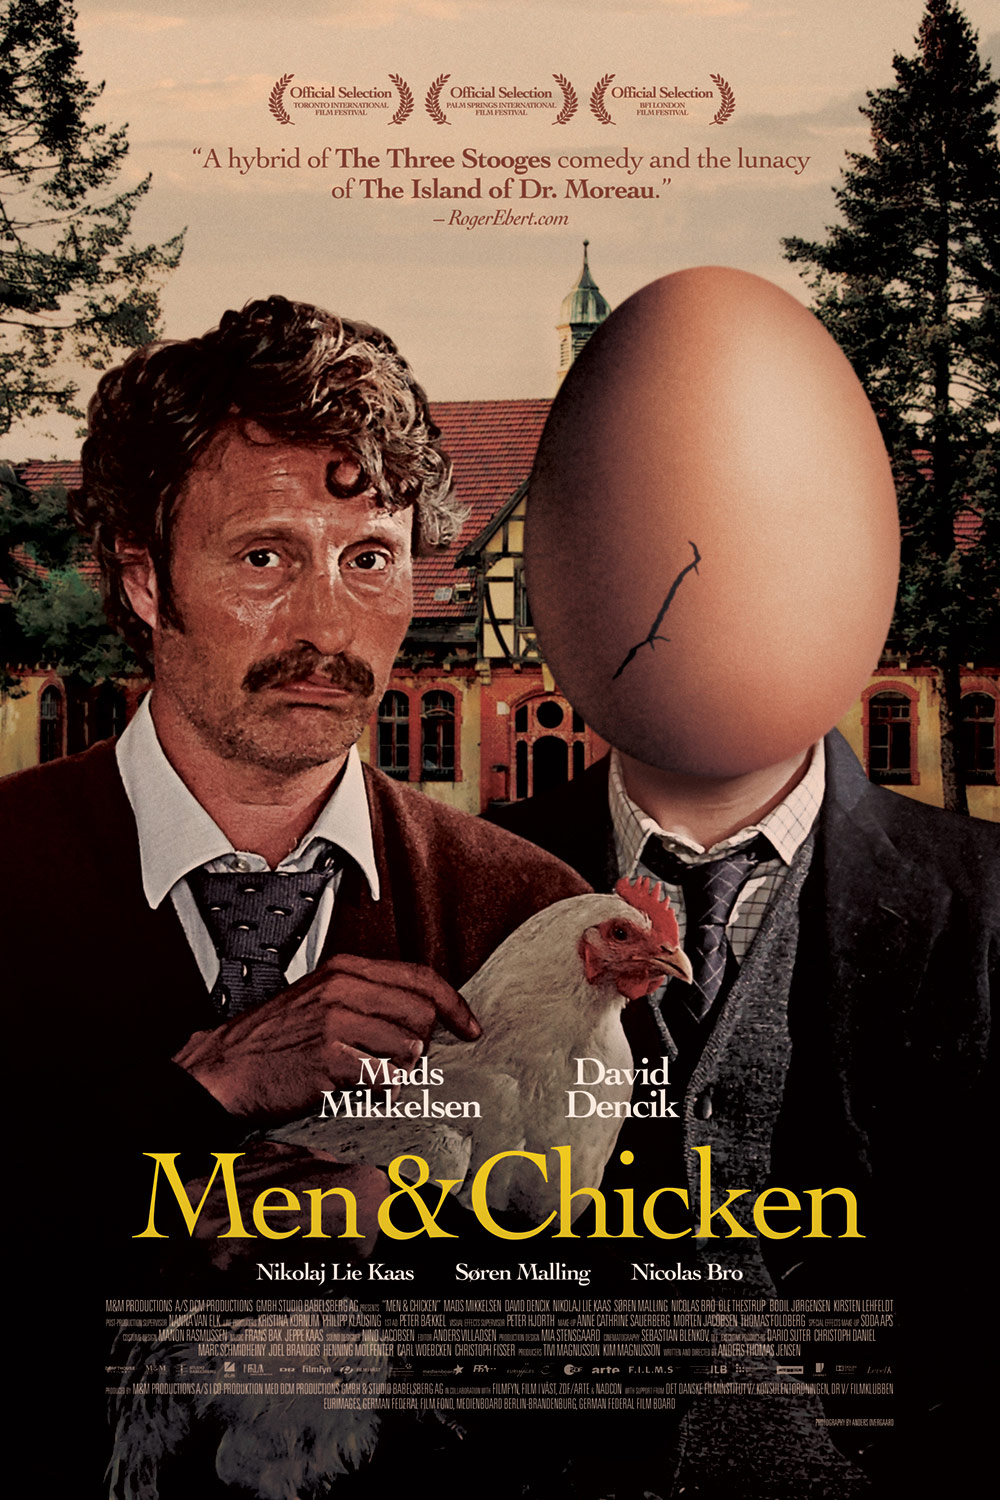 Movie poster for Men & Chicken, man holding chicken next to man with an egg as a head